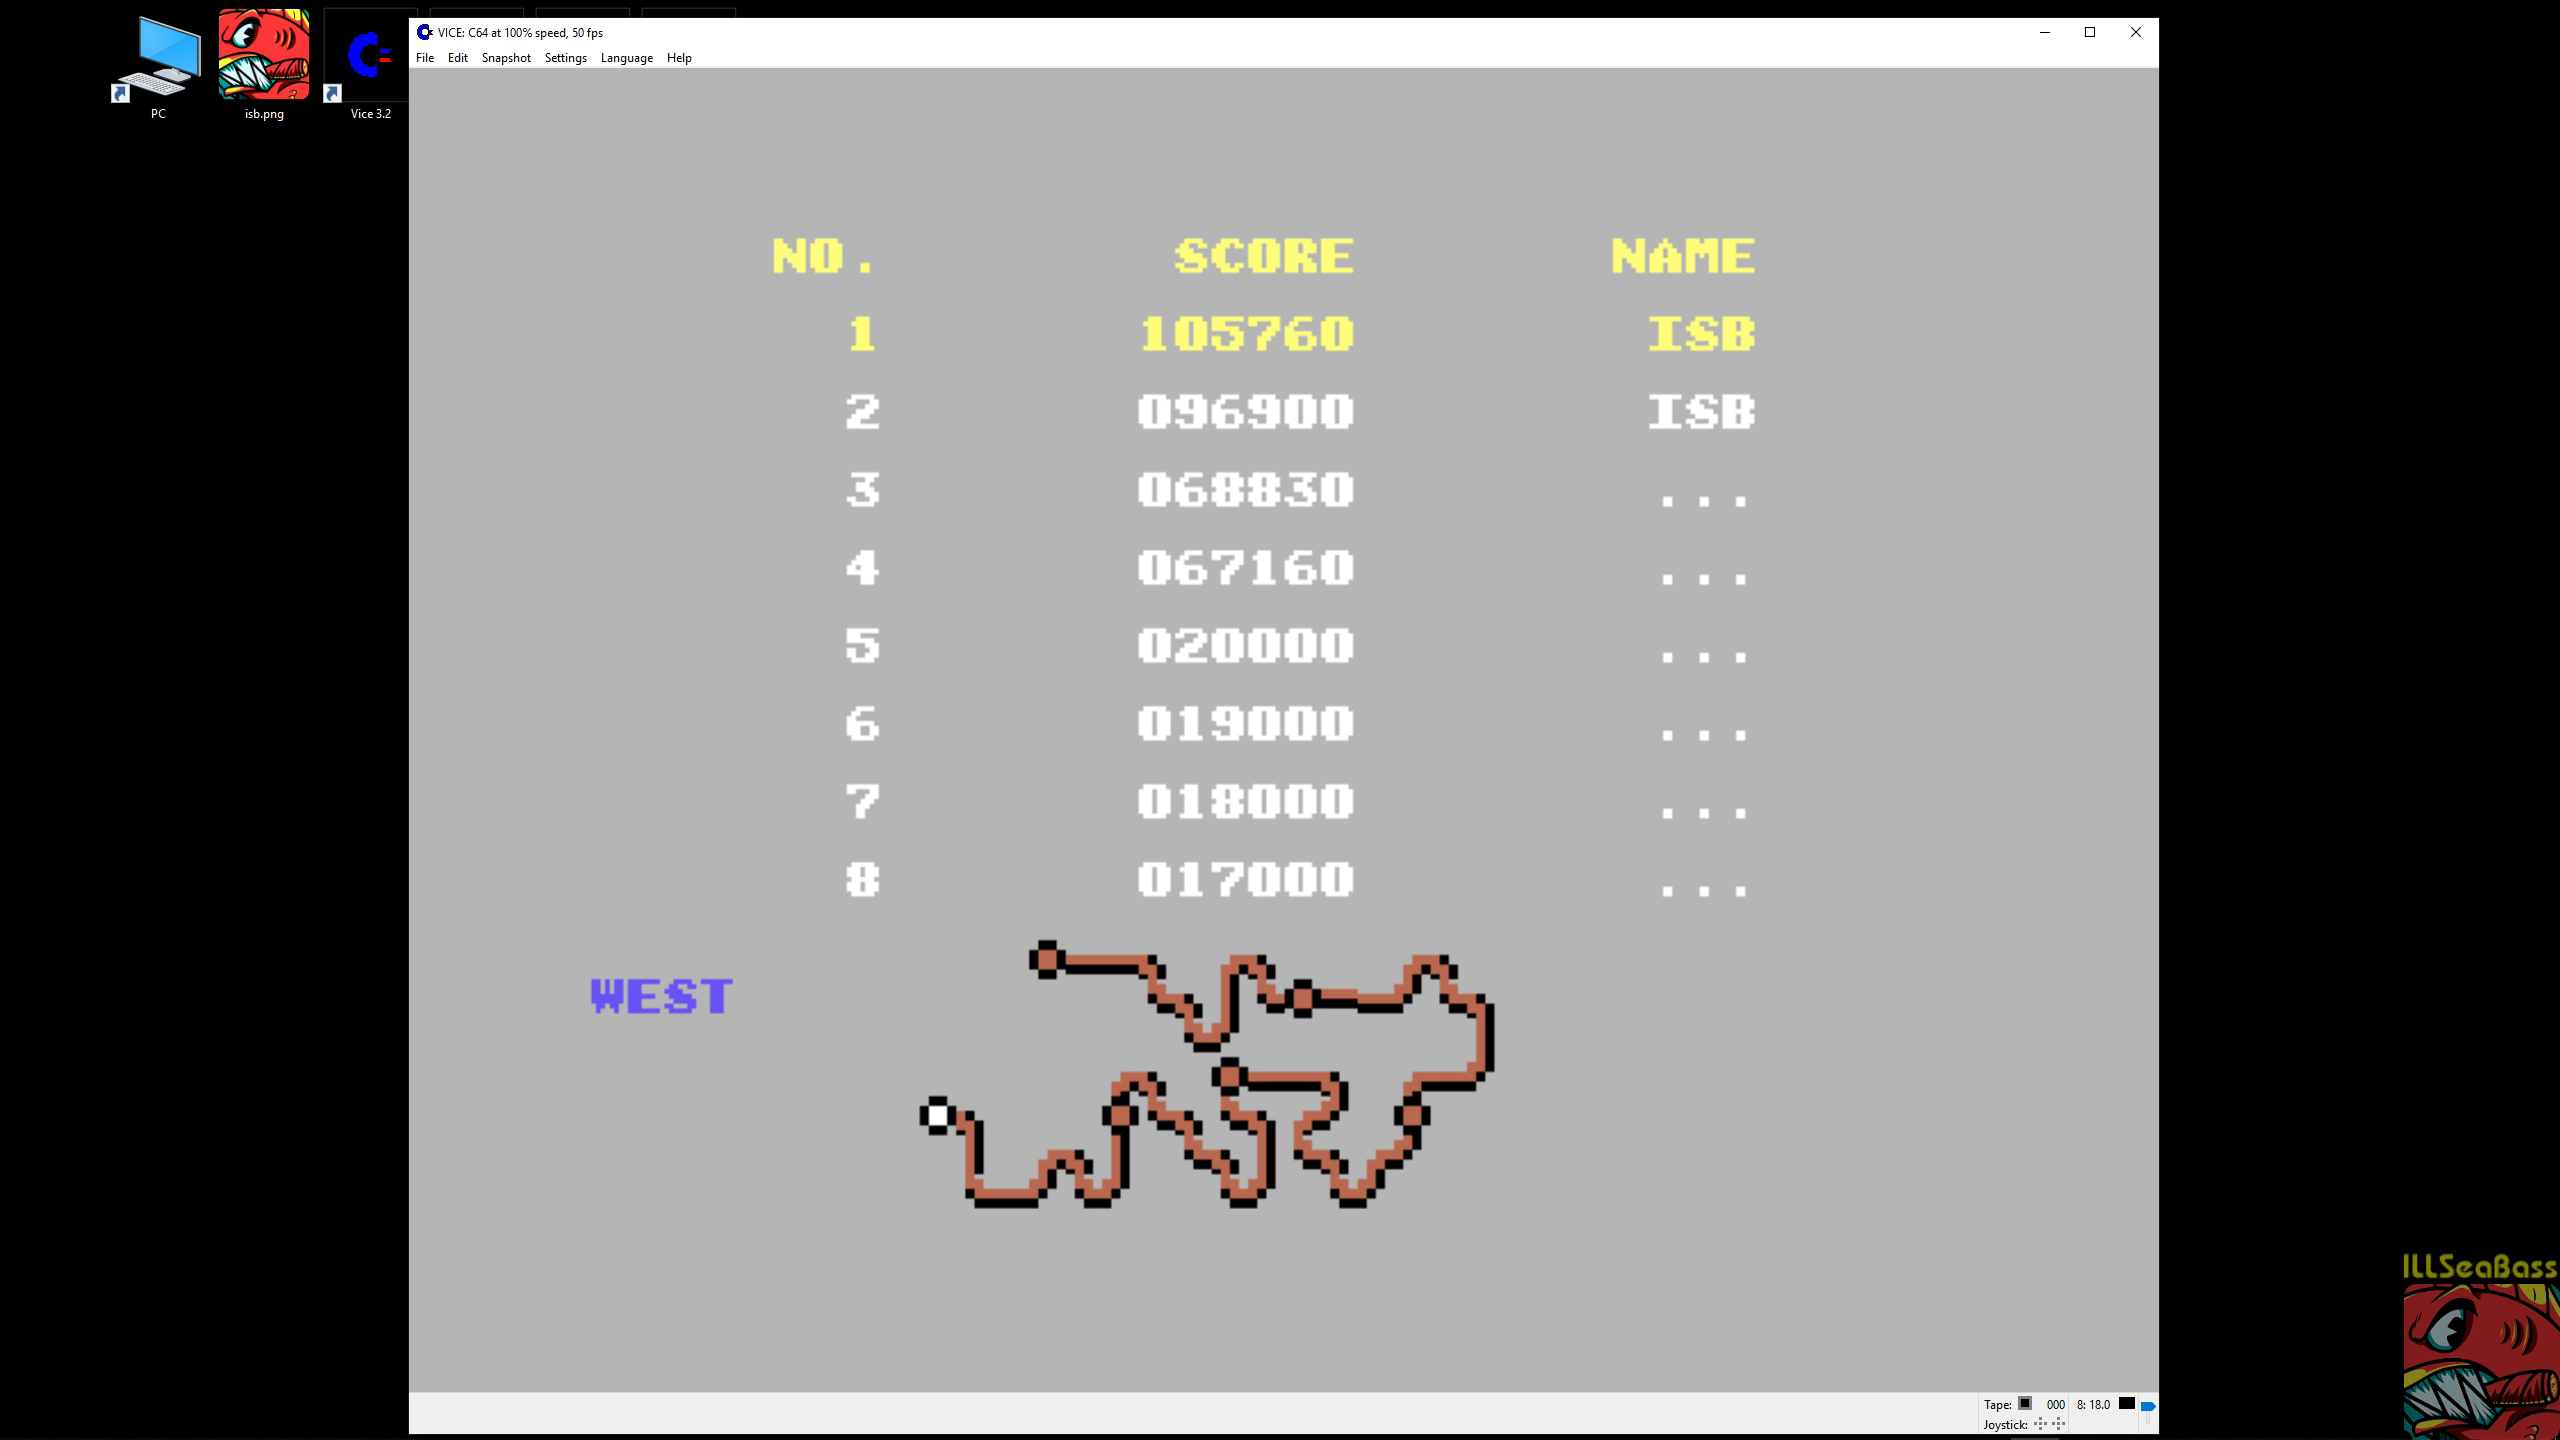 ILLSeaBass: Buggy Boy: West (Commodore 64 Emulated) 105,760 points on 2019-03-07 06:34:09